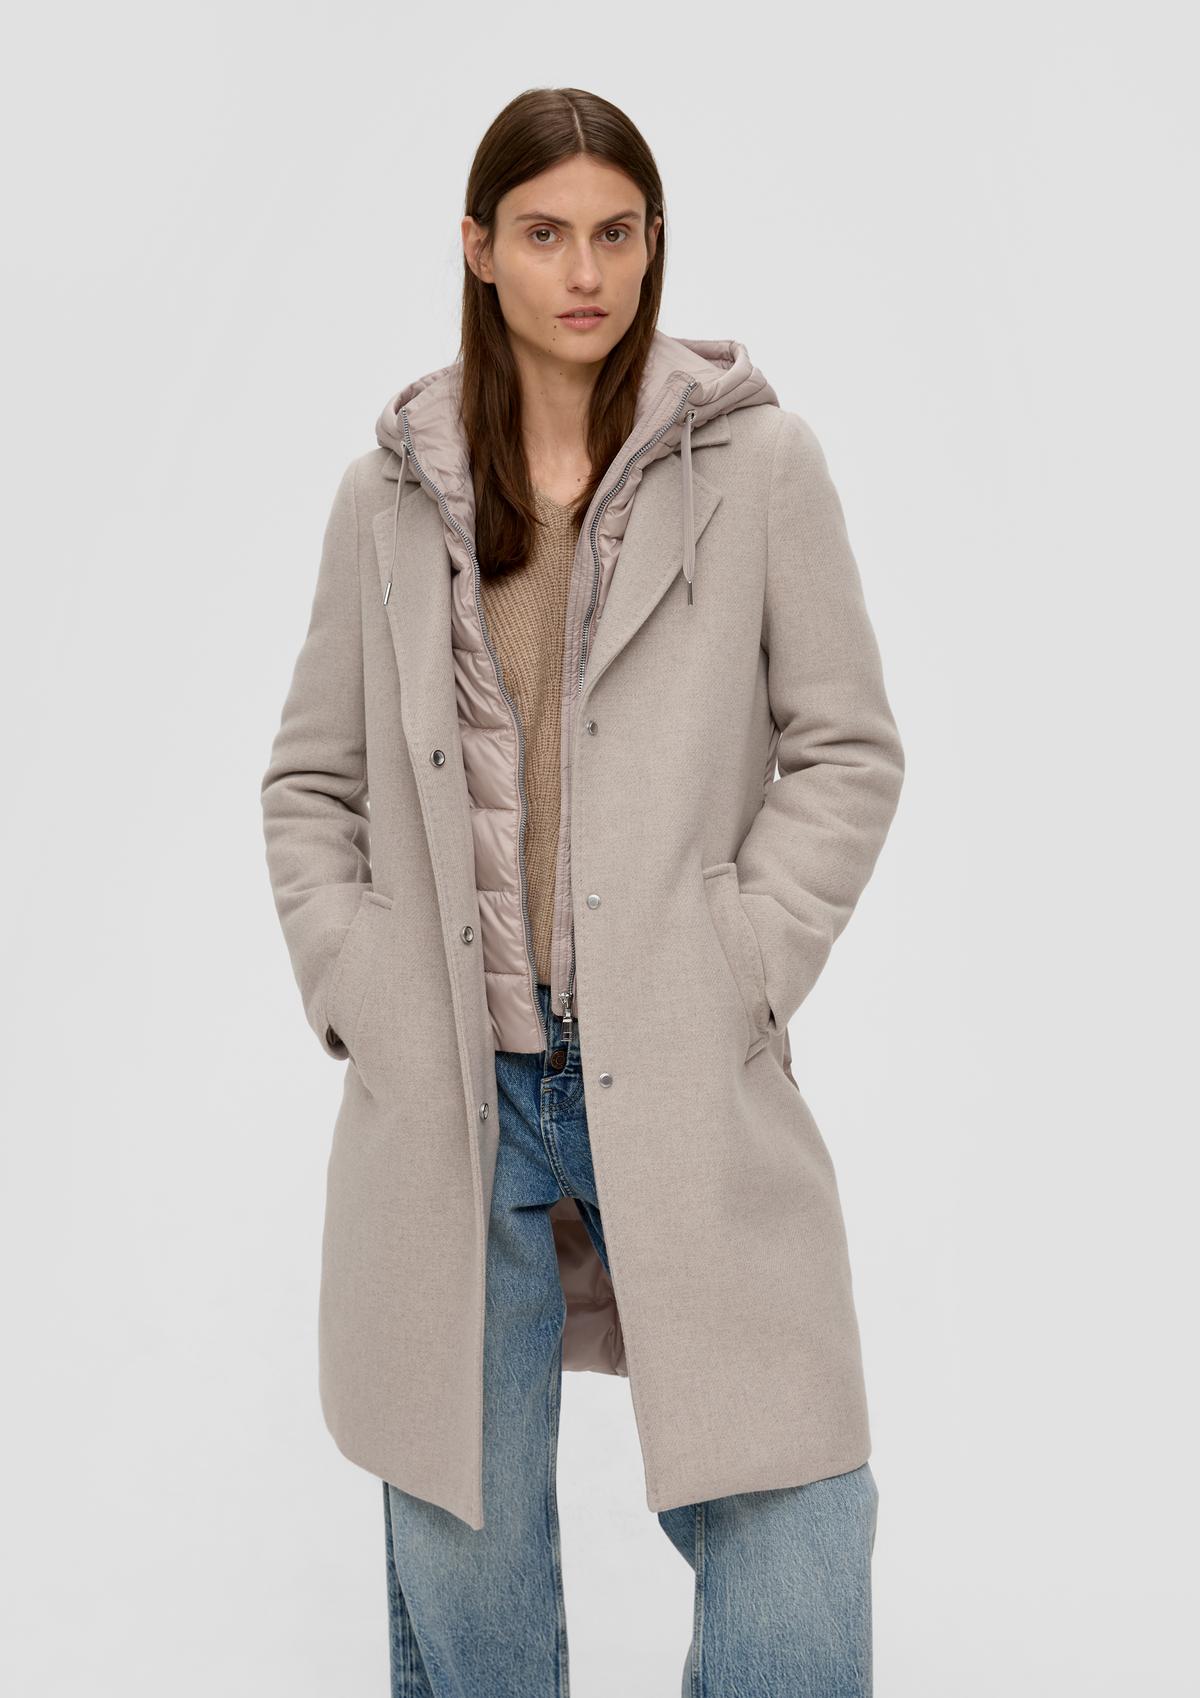 Hooded coat in a mix of materials